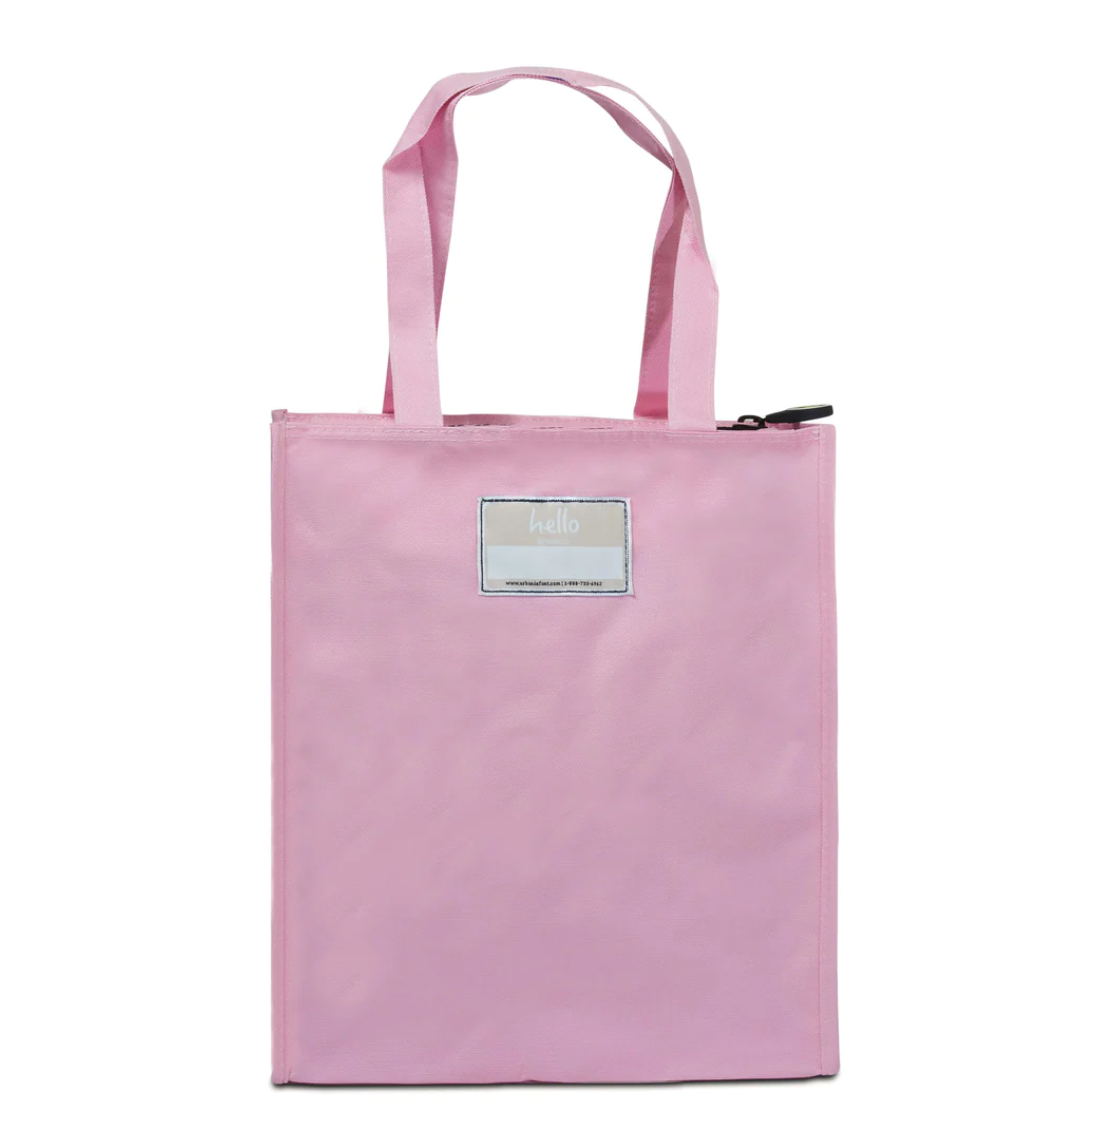 Kids Activity Tote Bag with Zippered Top - Pink